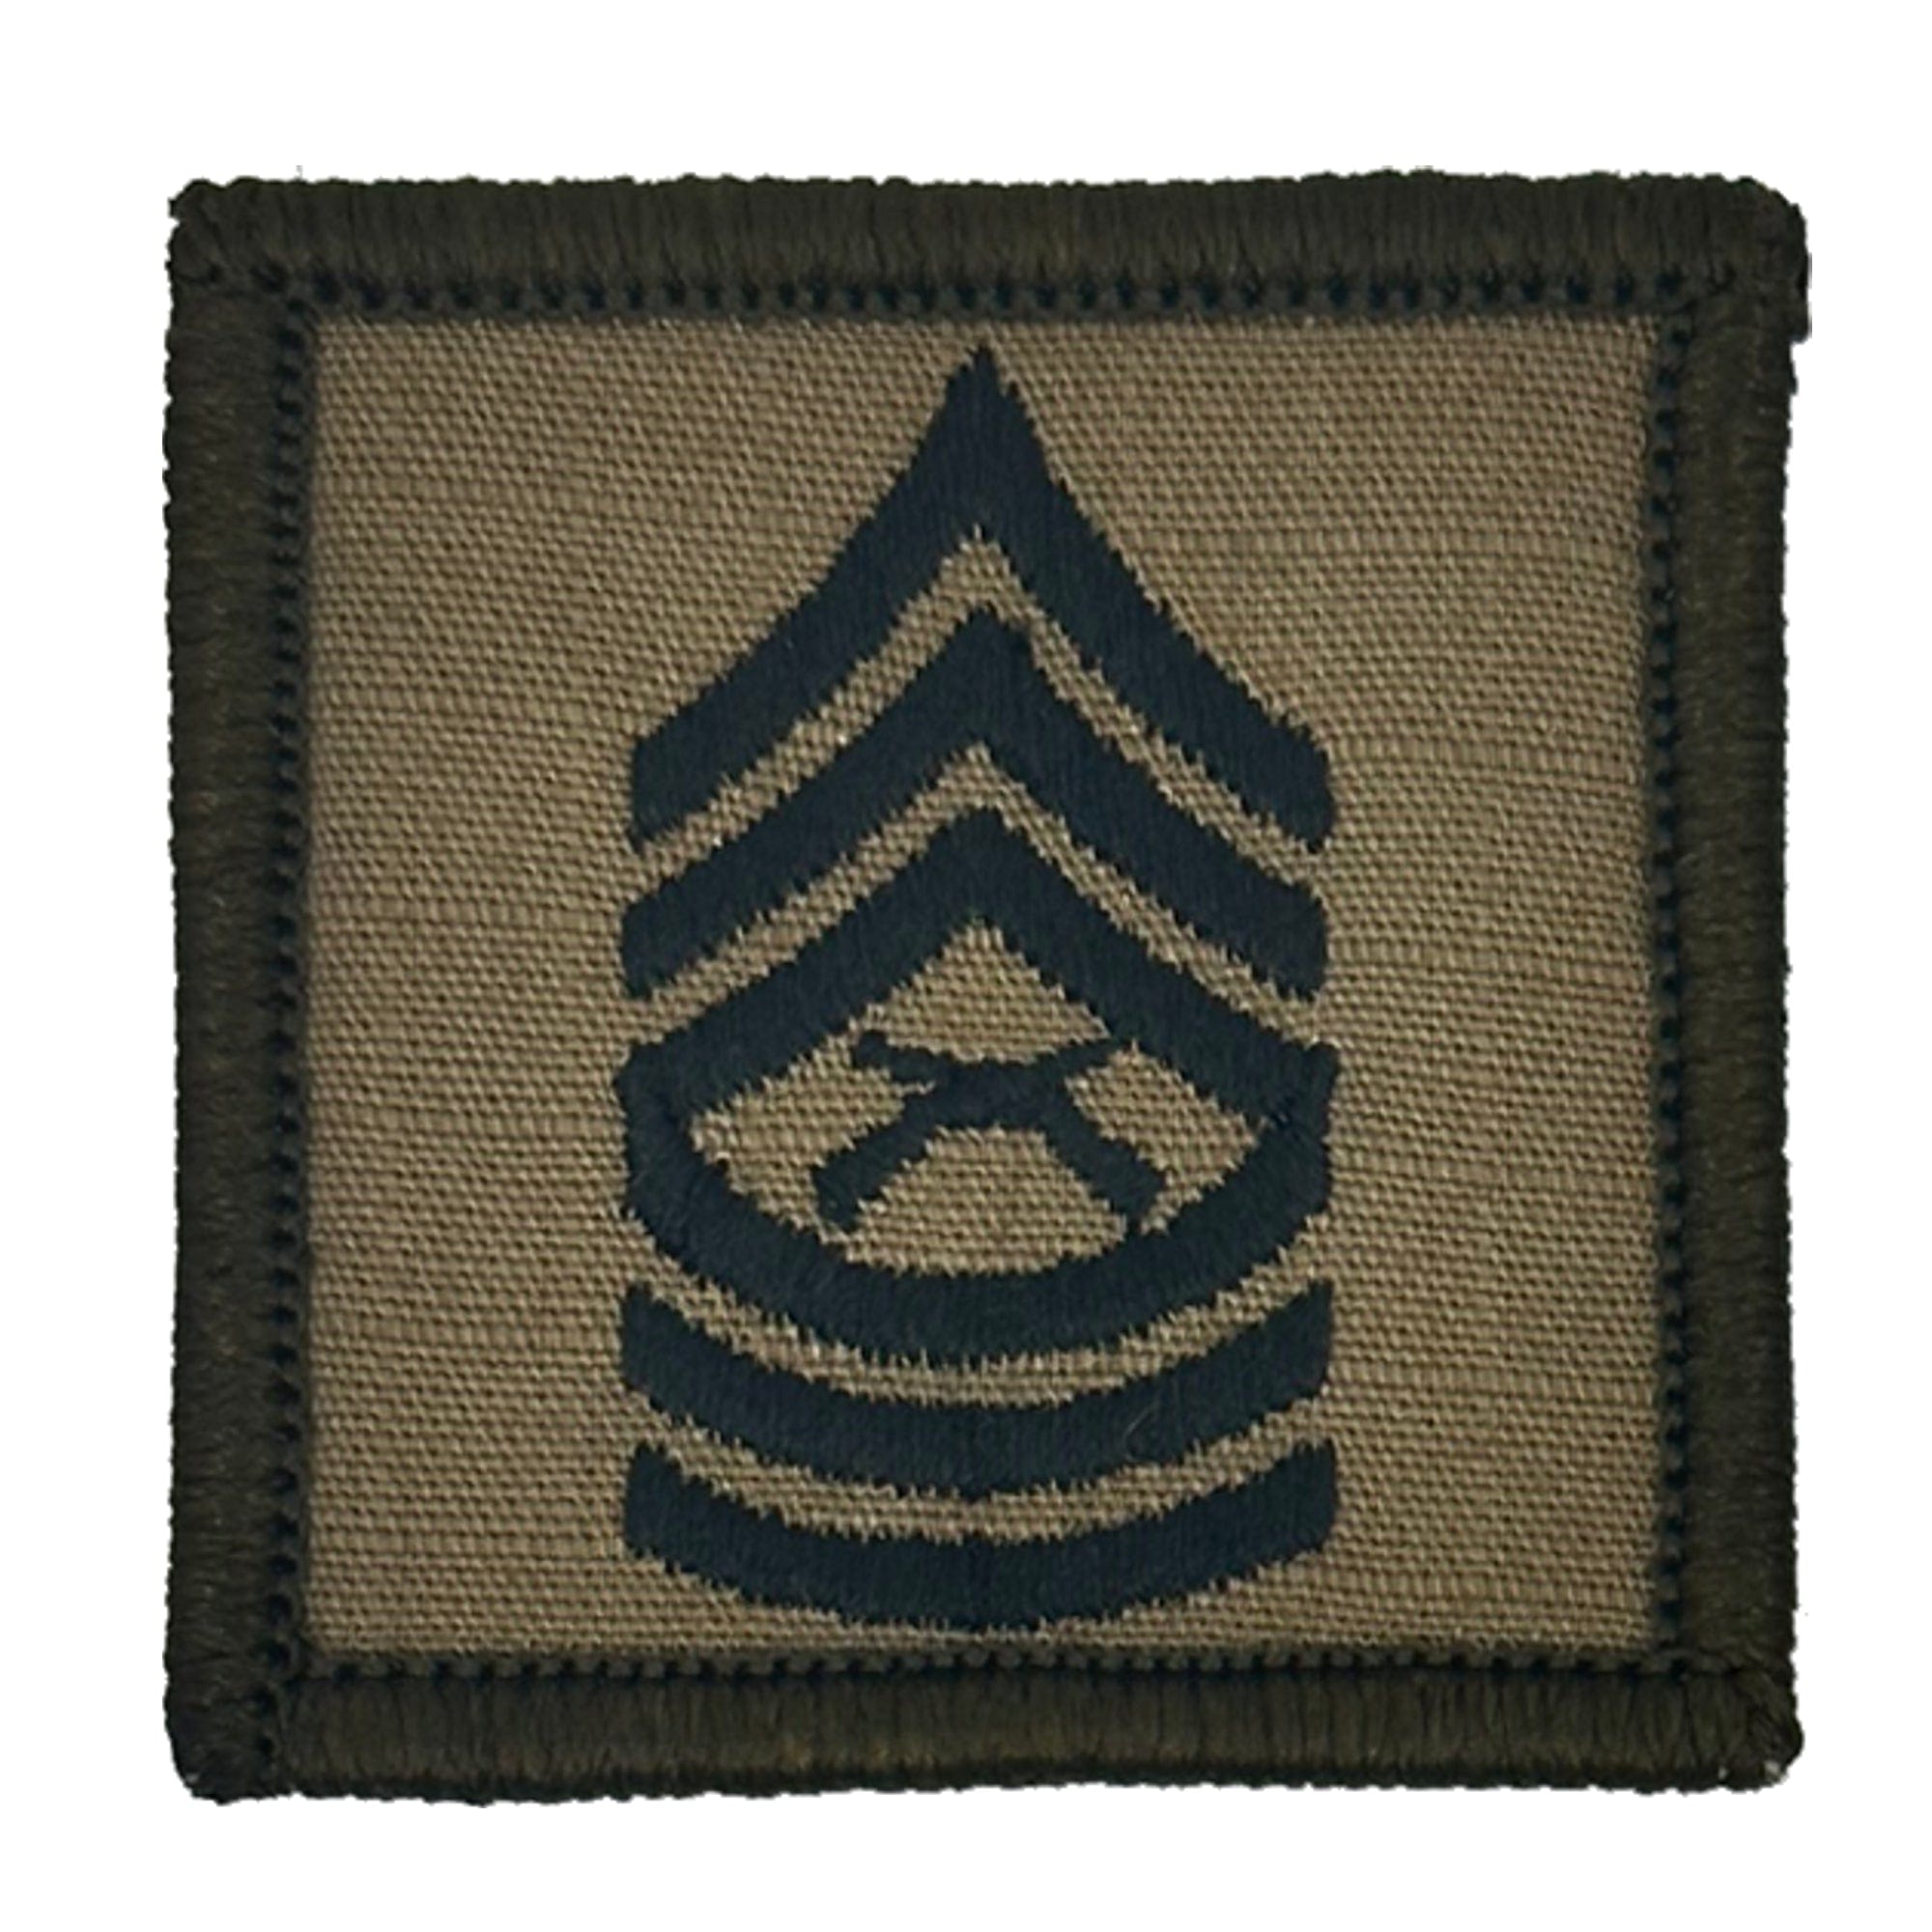 Tactical Gear Junkie Patches Coyote Brown / Master Sergeant USMC Rank Insignia - 2x2 Patch